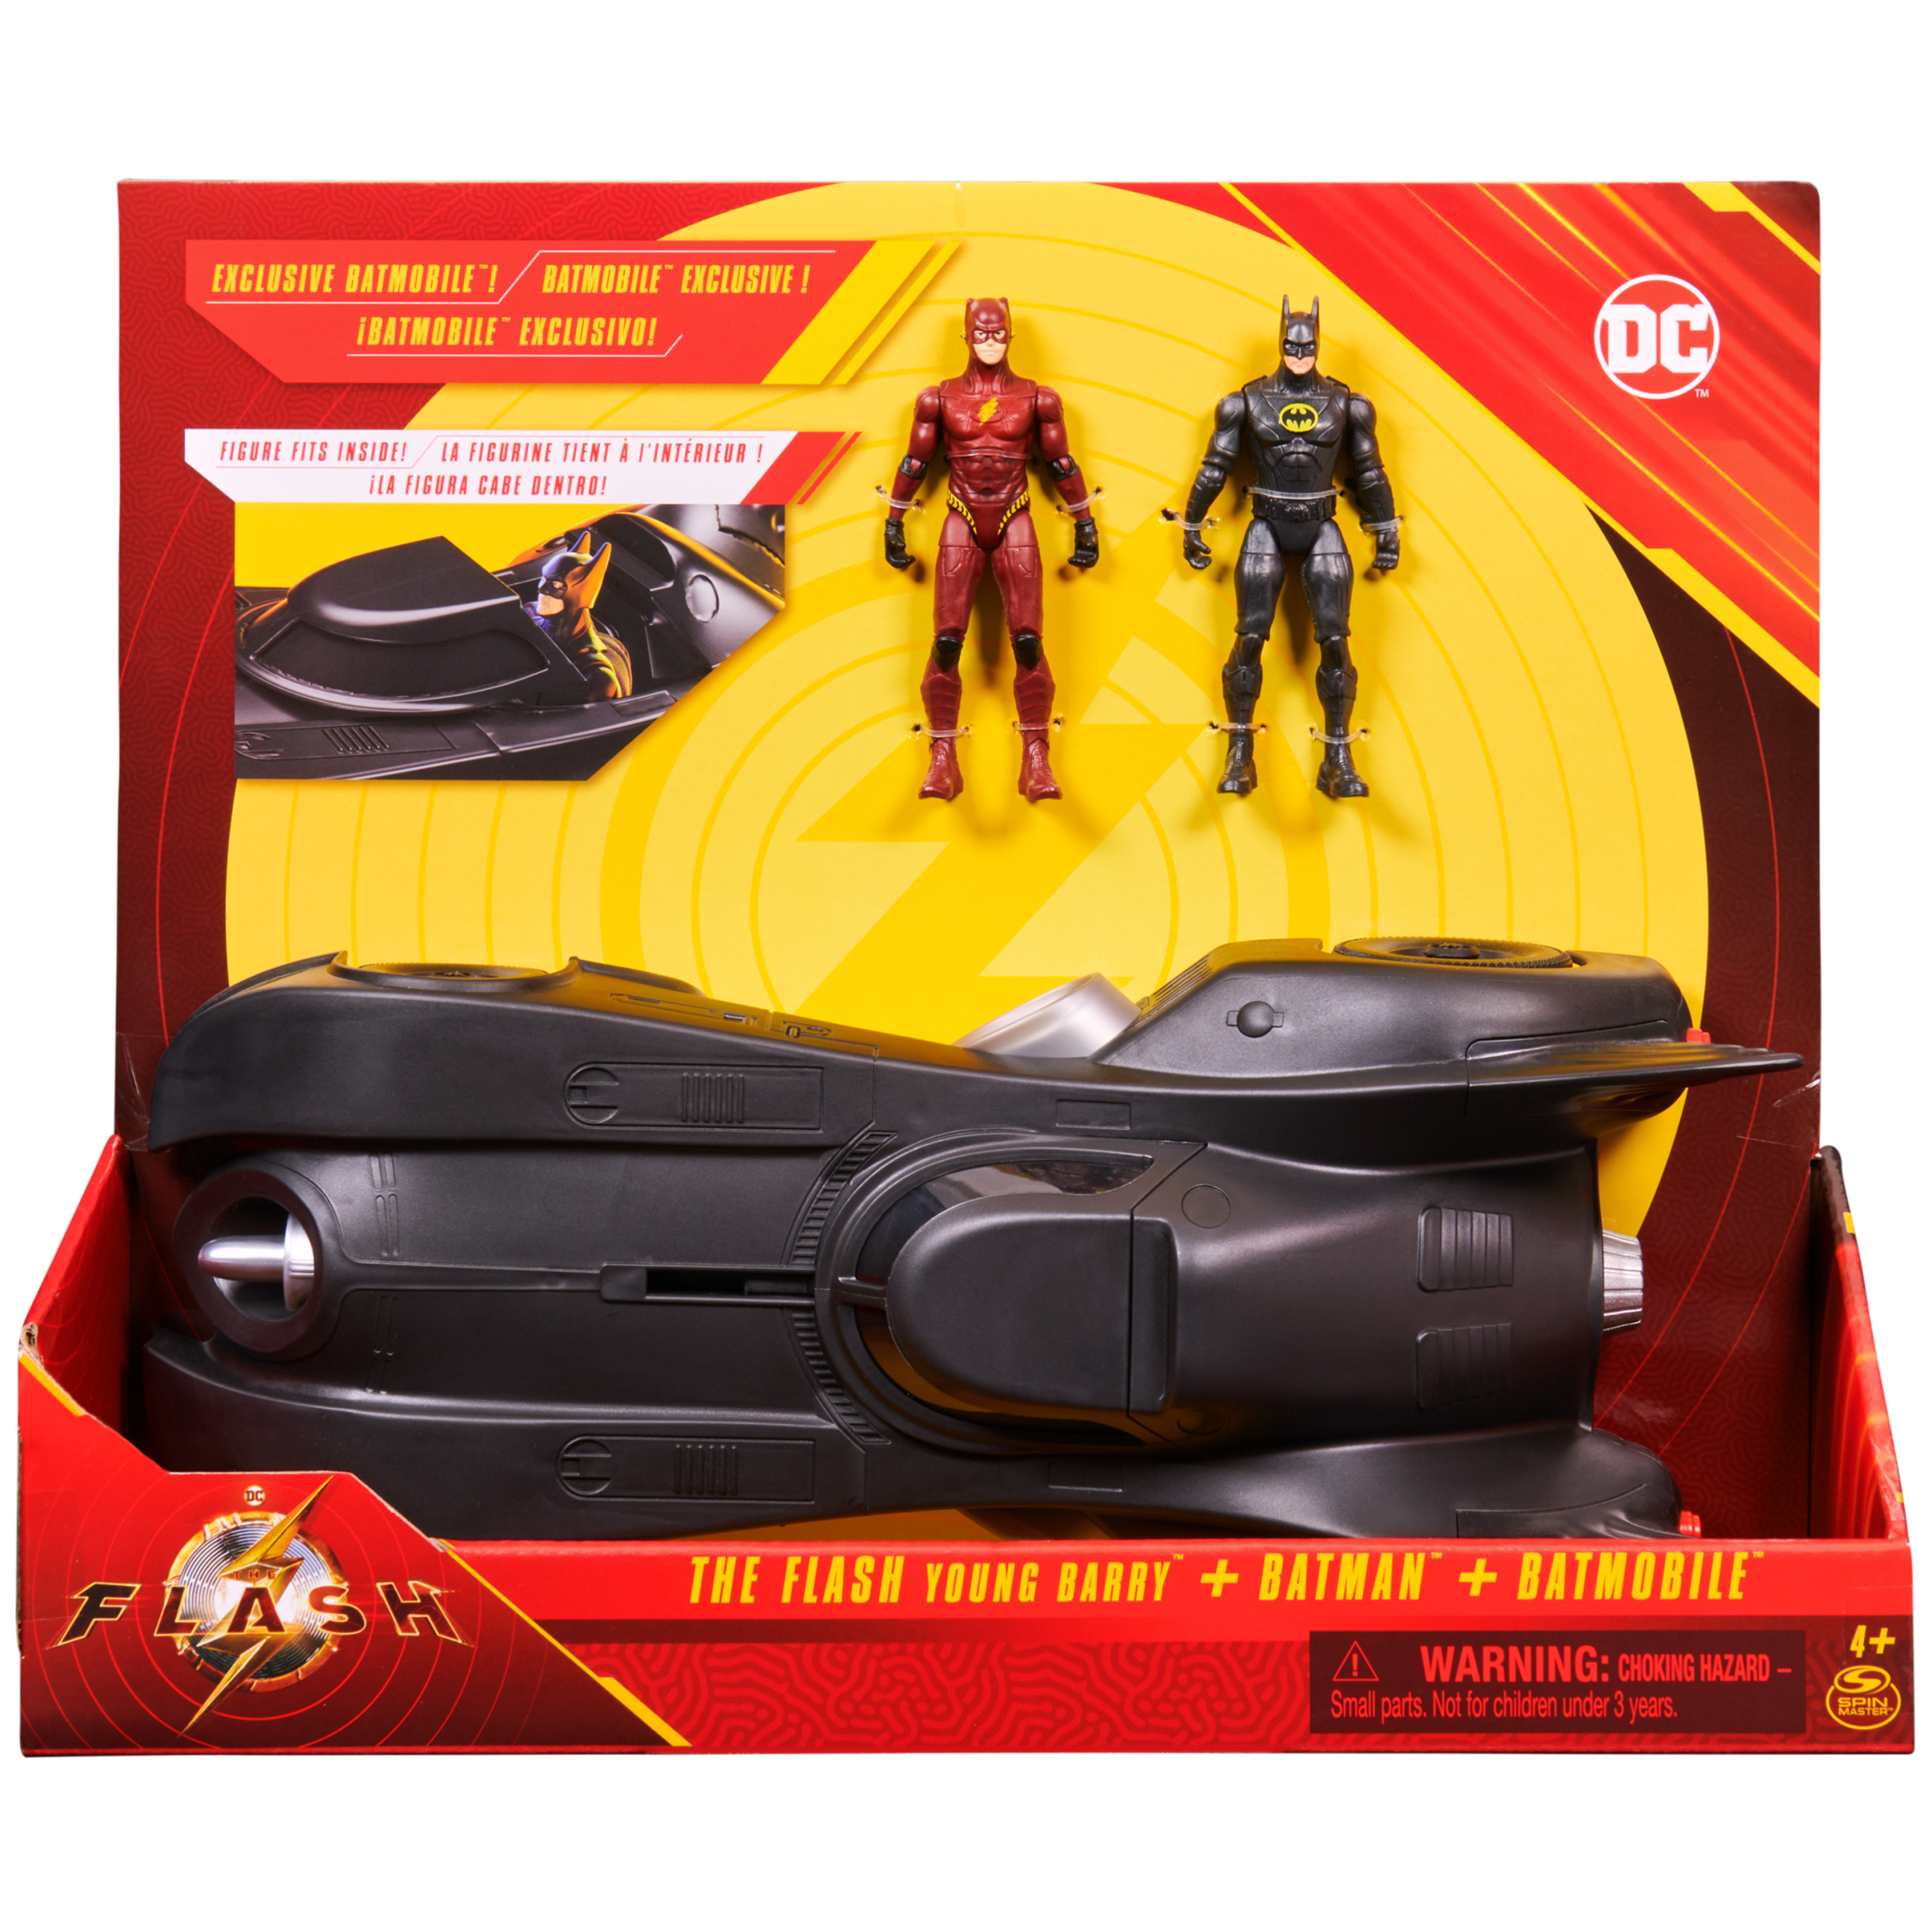 DC Comics: The Flash Batmobile 3-Pack with 2 Figures and Batmobile - image 2 of 8